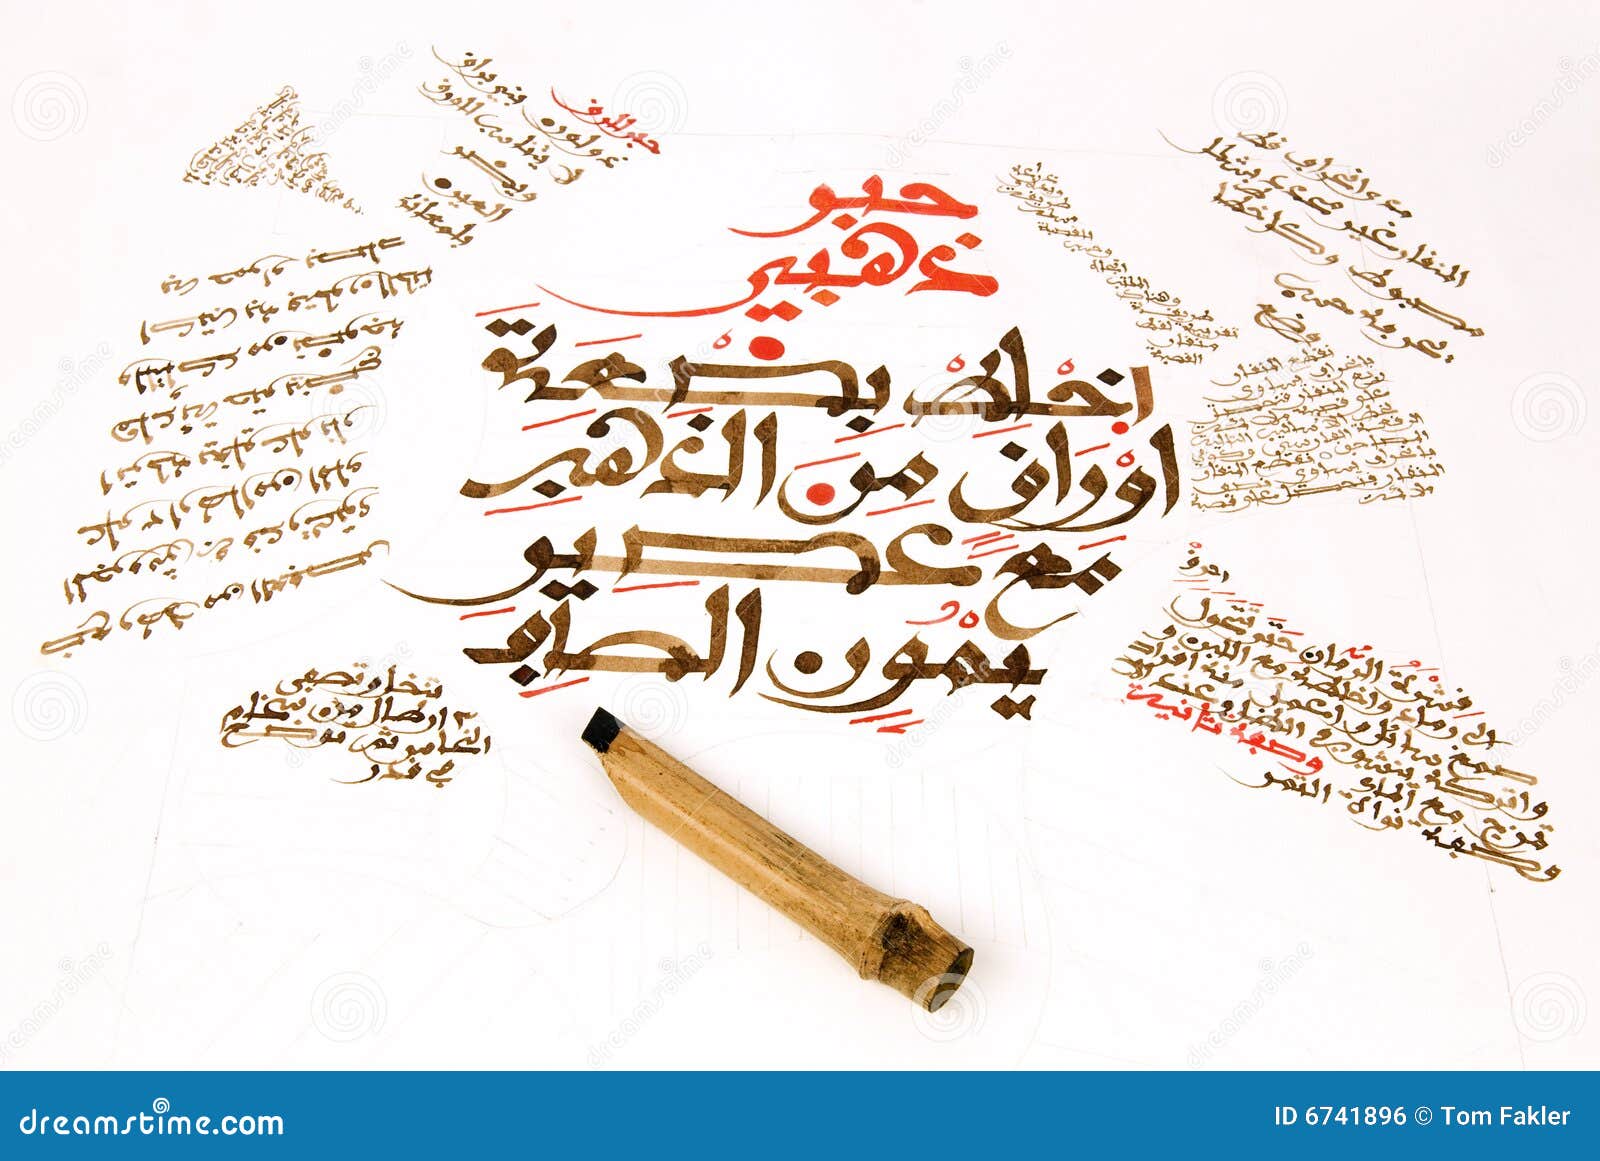 arabic calligraphy on paper